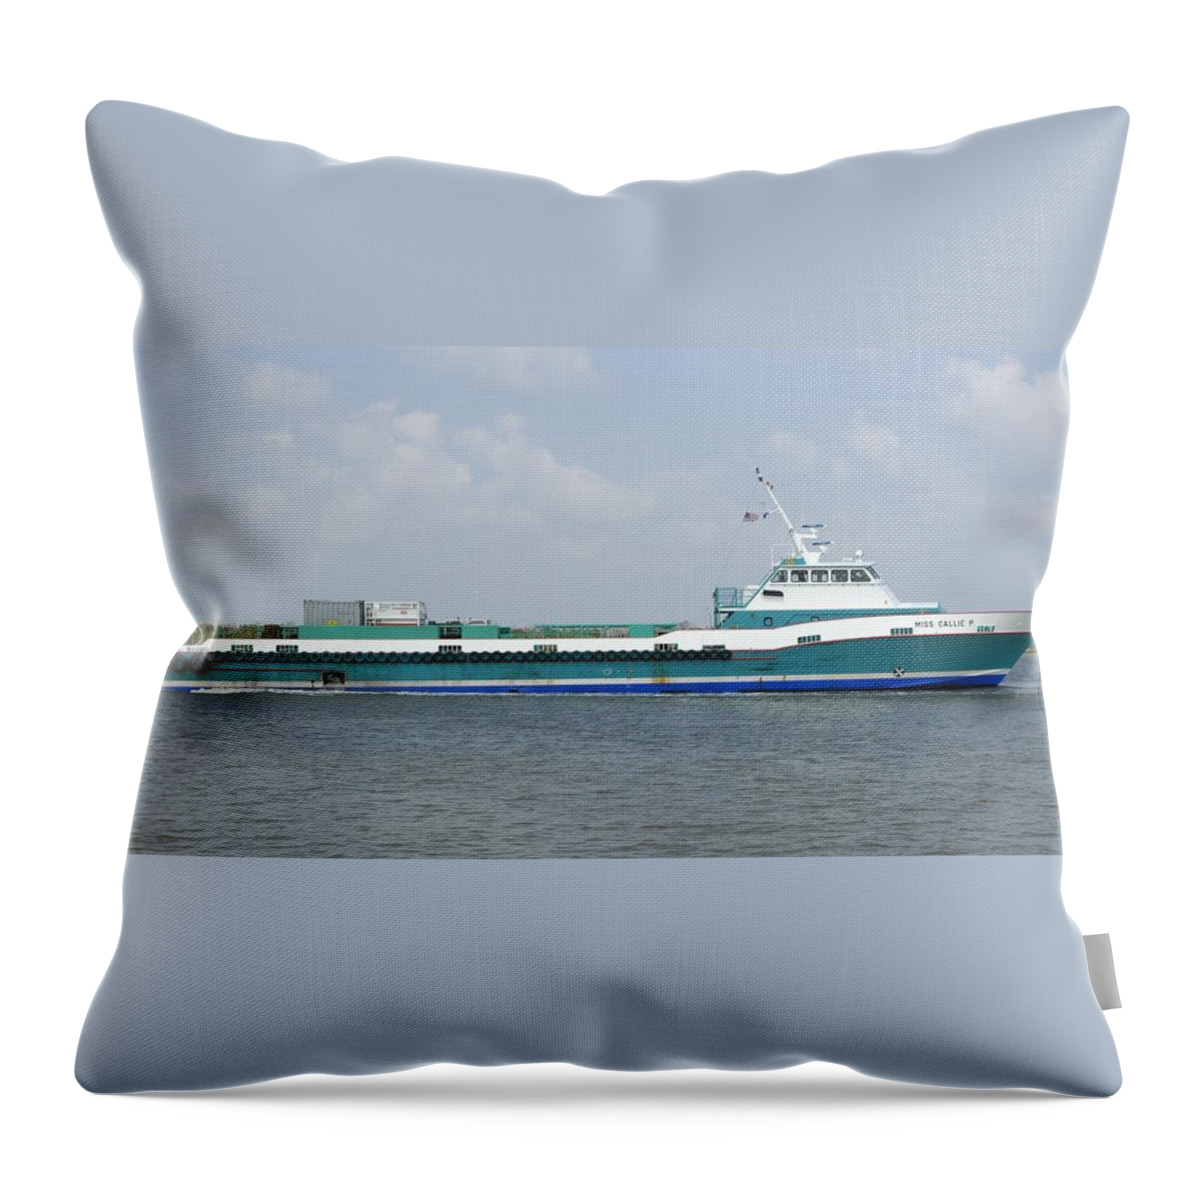 Crew Boat Throw Pillow featuring the photograph Miss Callie P by Bradford Martin